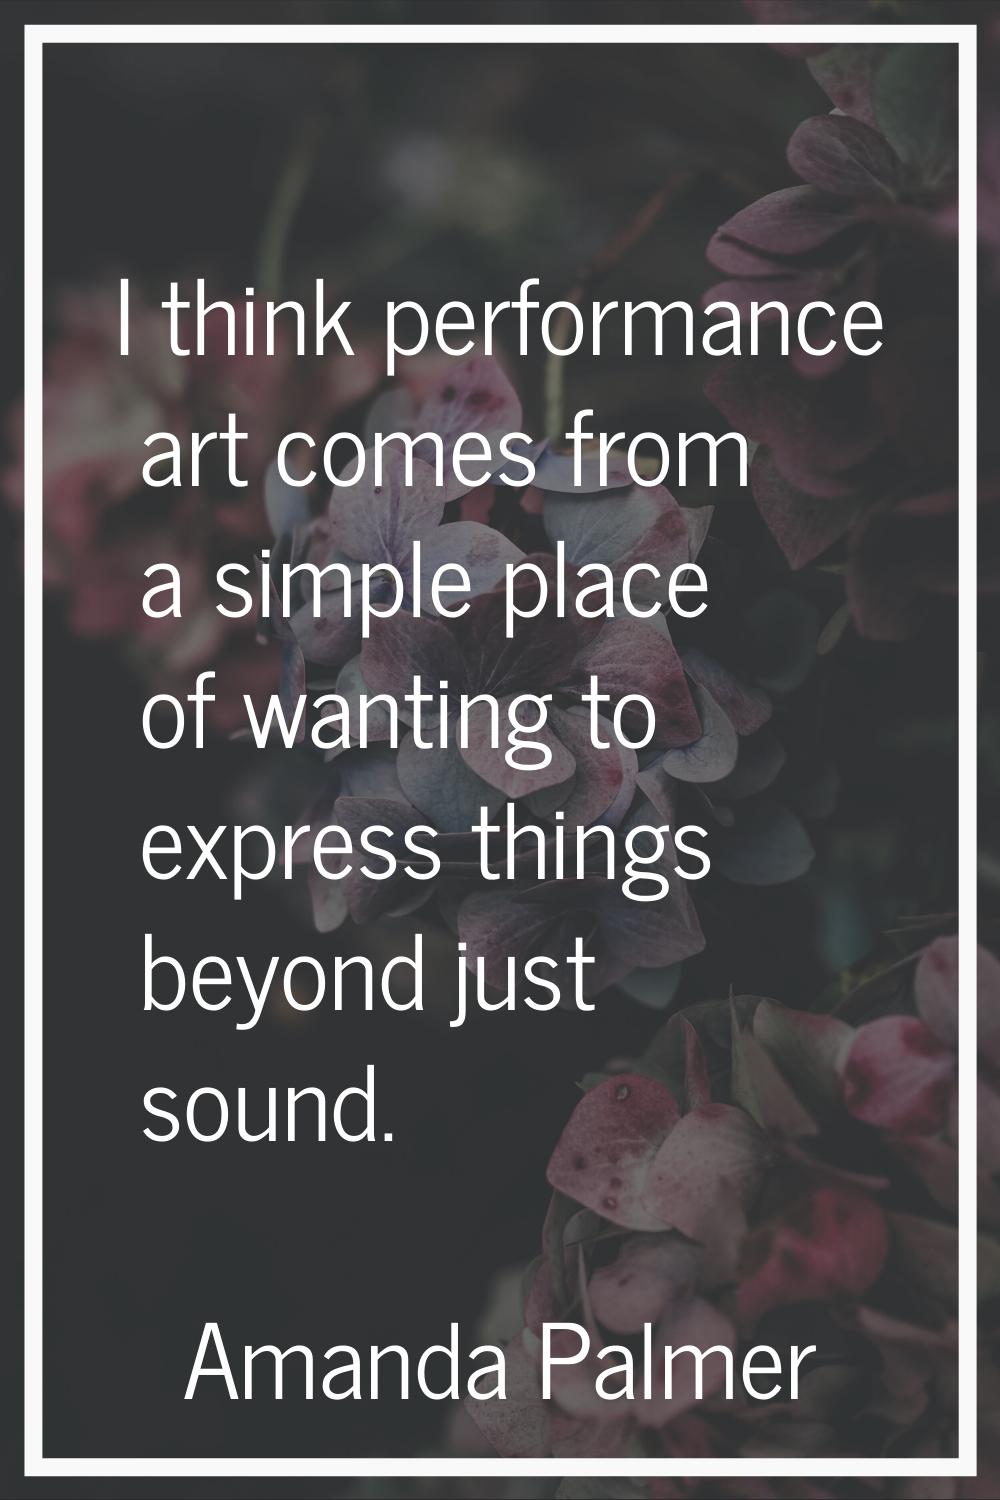 I think performance art comes from a simple place of wanting to express things beyond just sound.